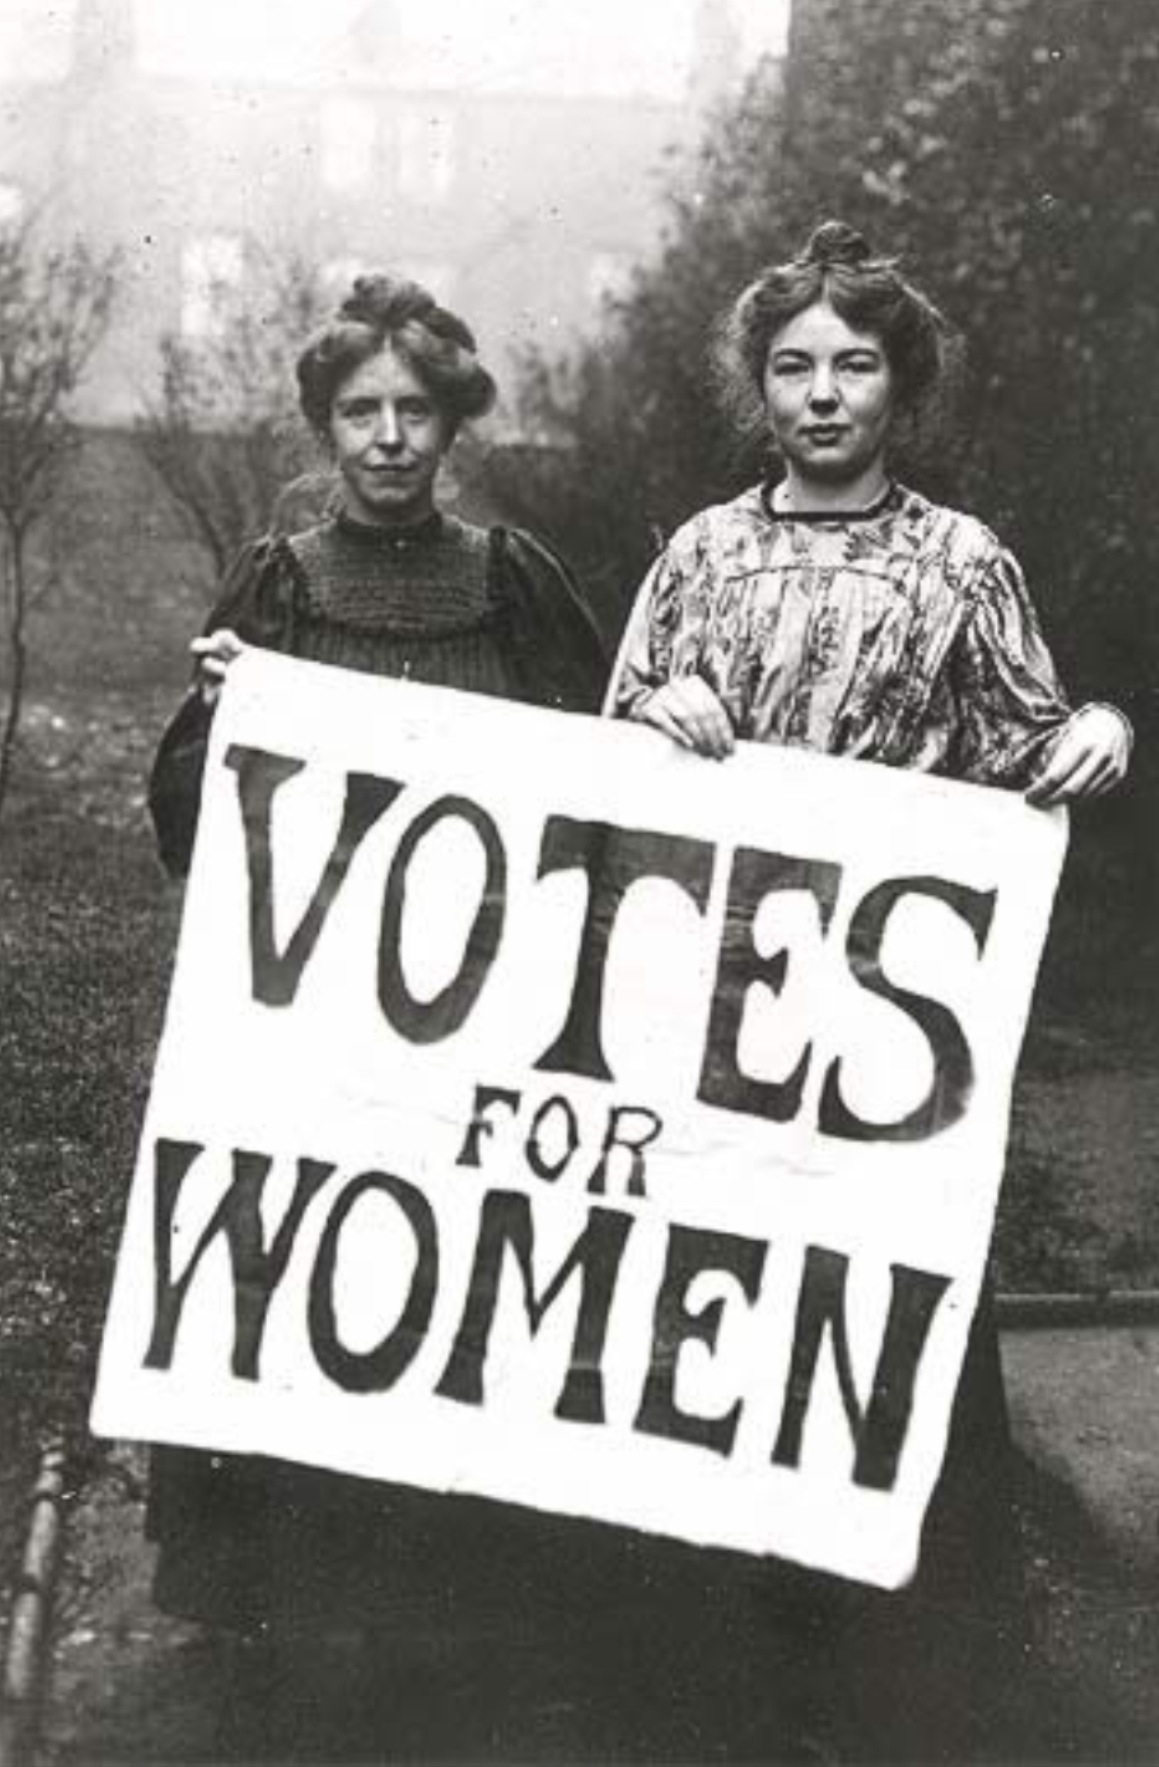 What amendment gave women the right to vote?